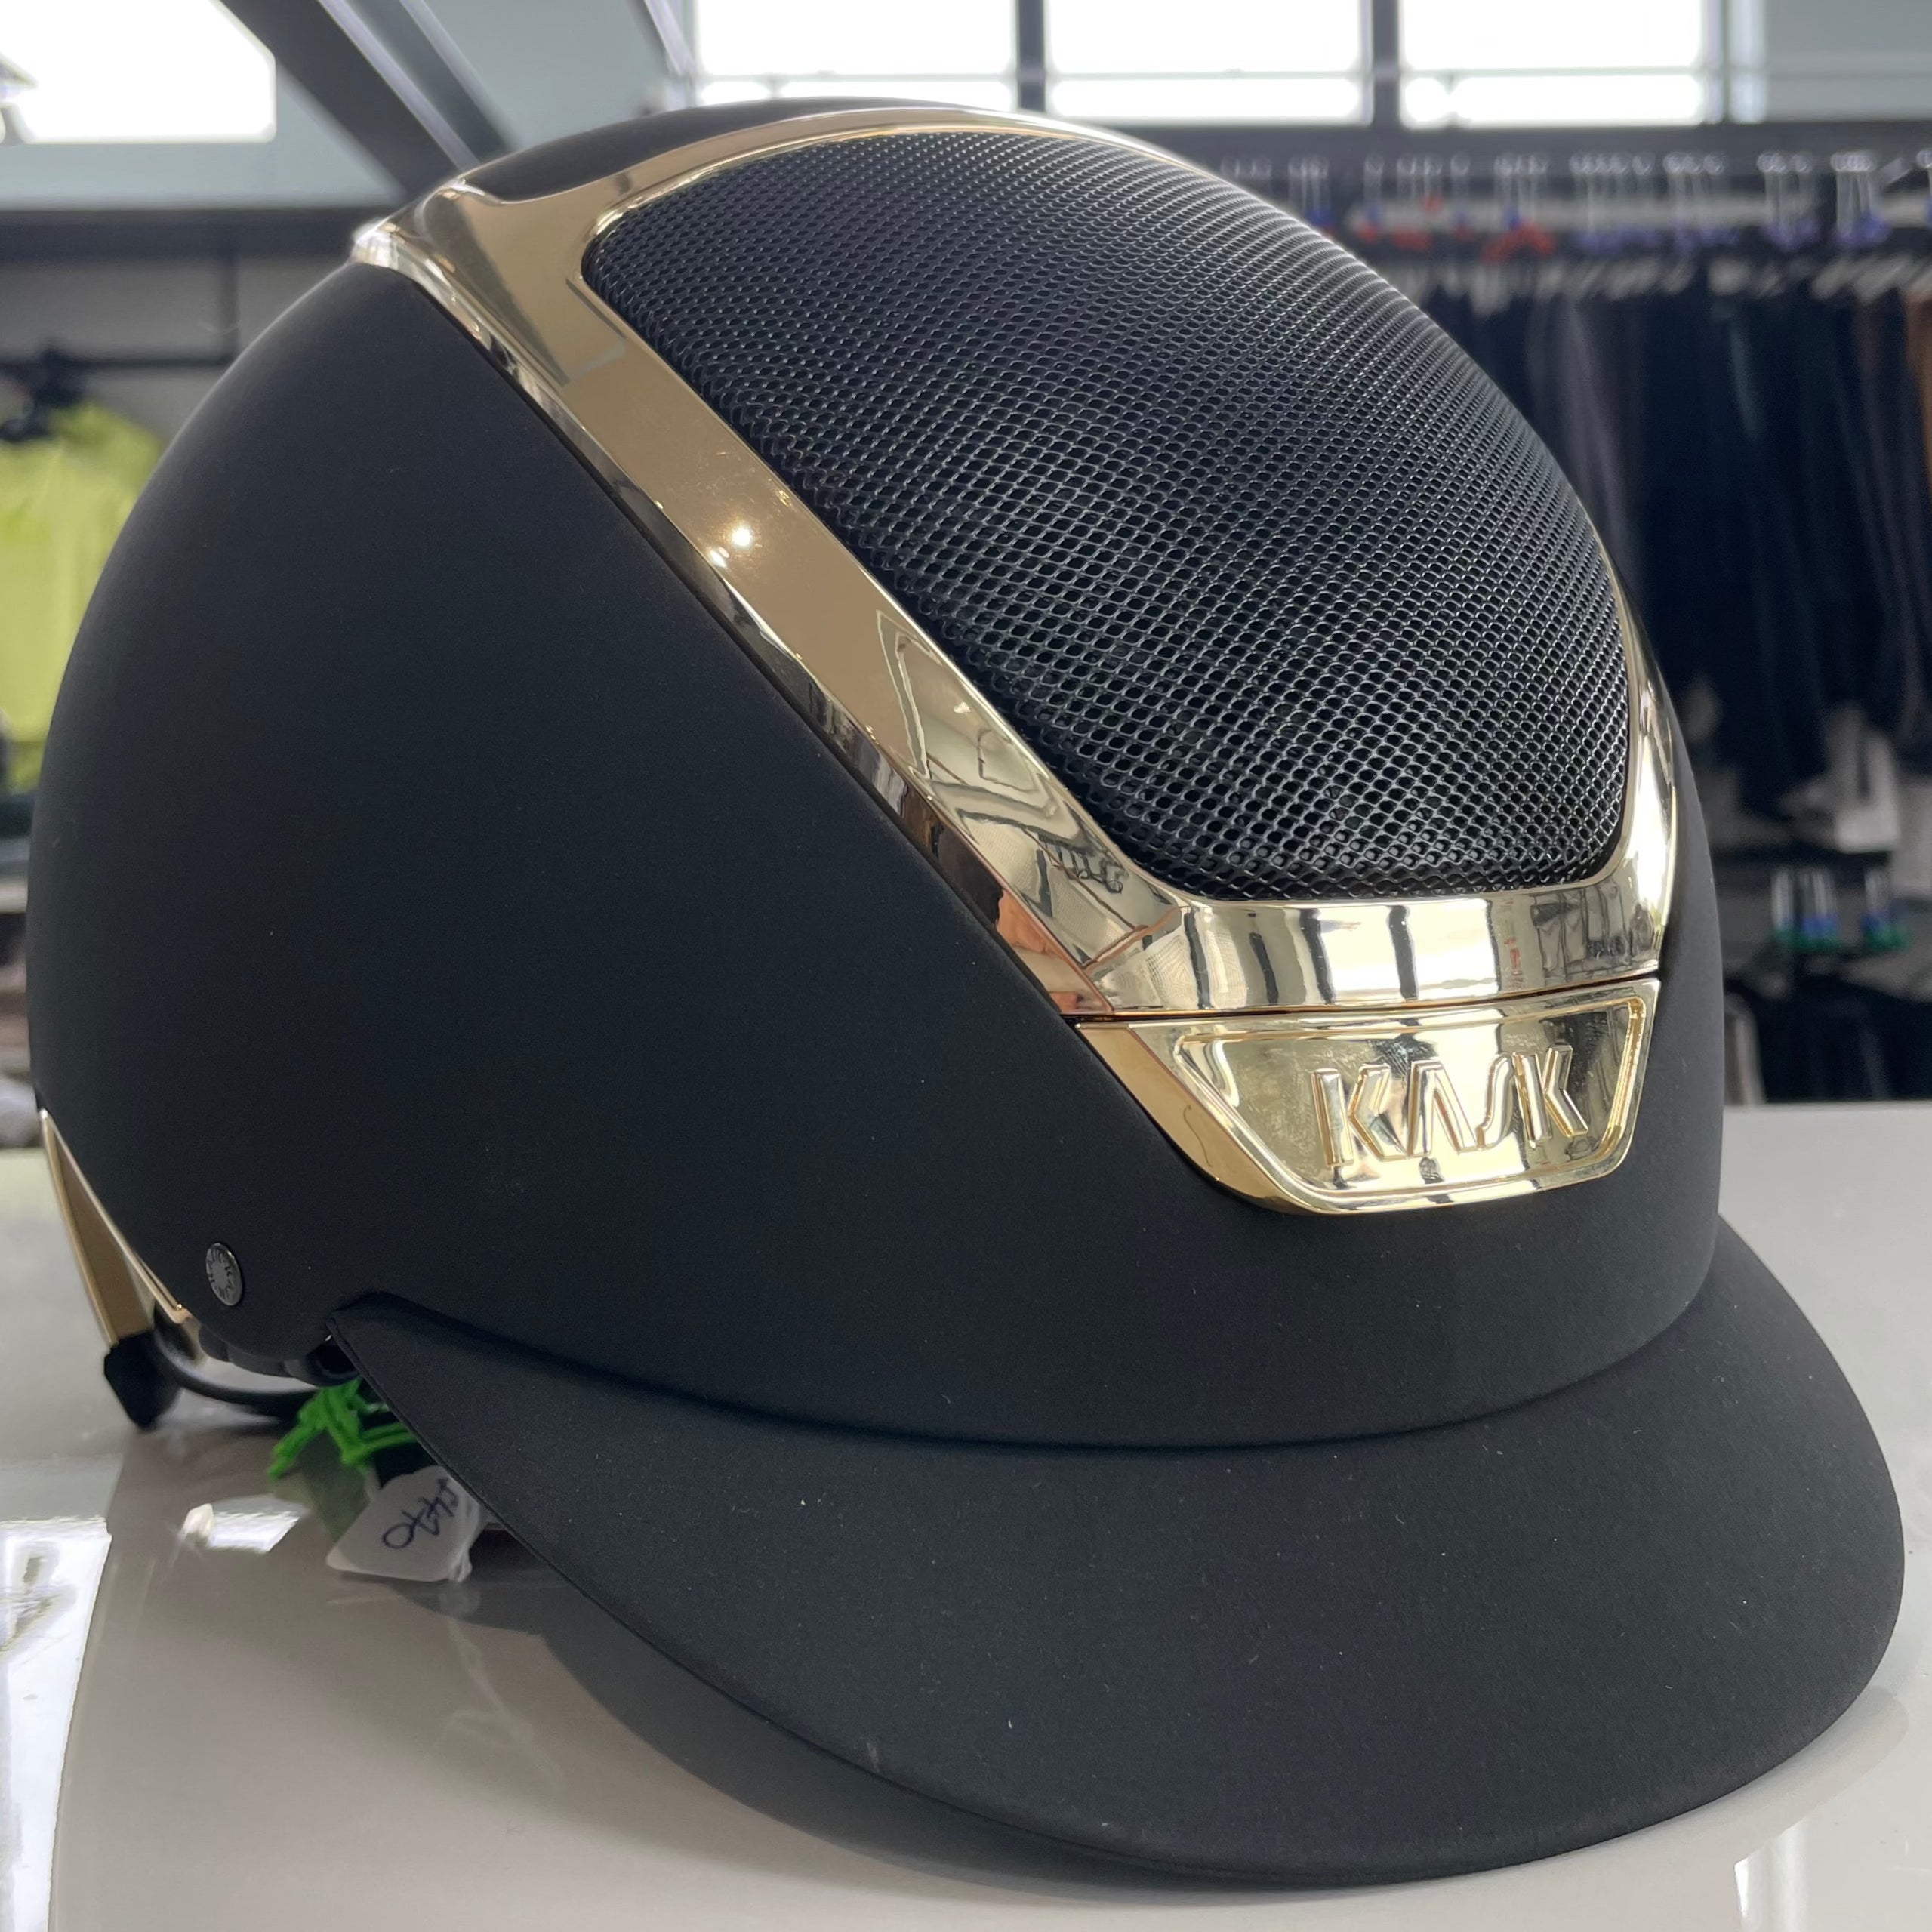 Kask Dogma Chrome Black Gold M- in stock and ready to ship!